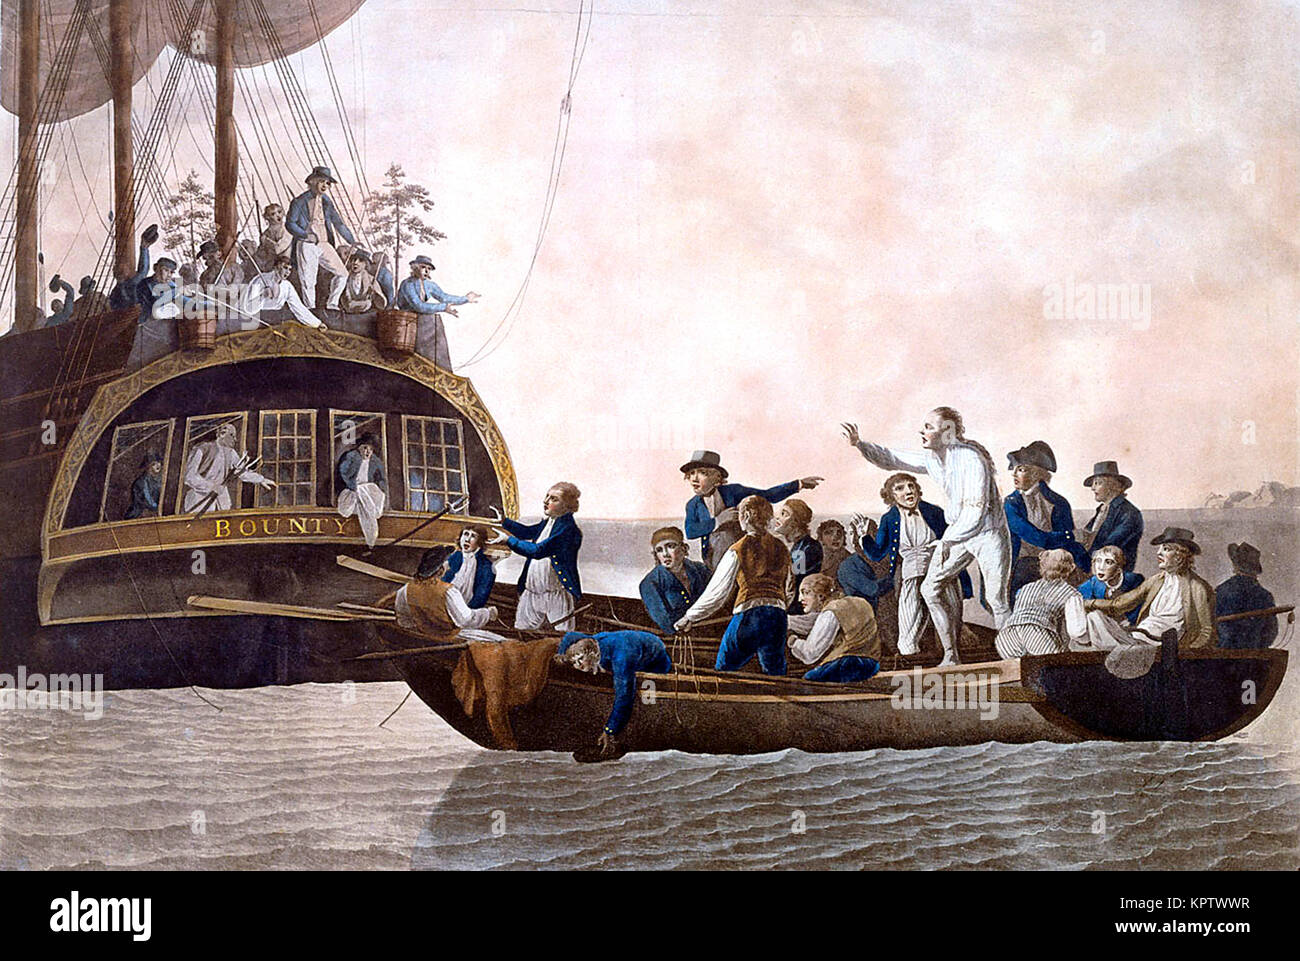 how did captain william bligh survive two mutinies in the british navy